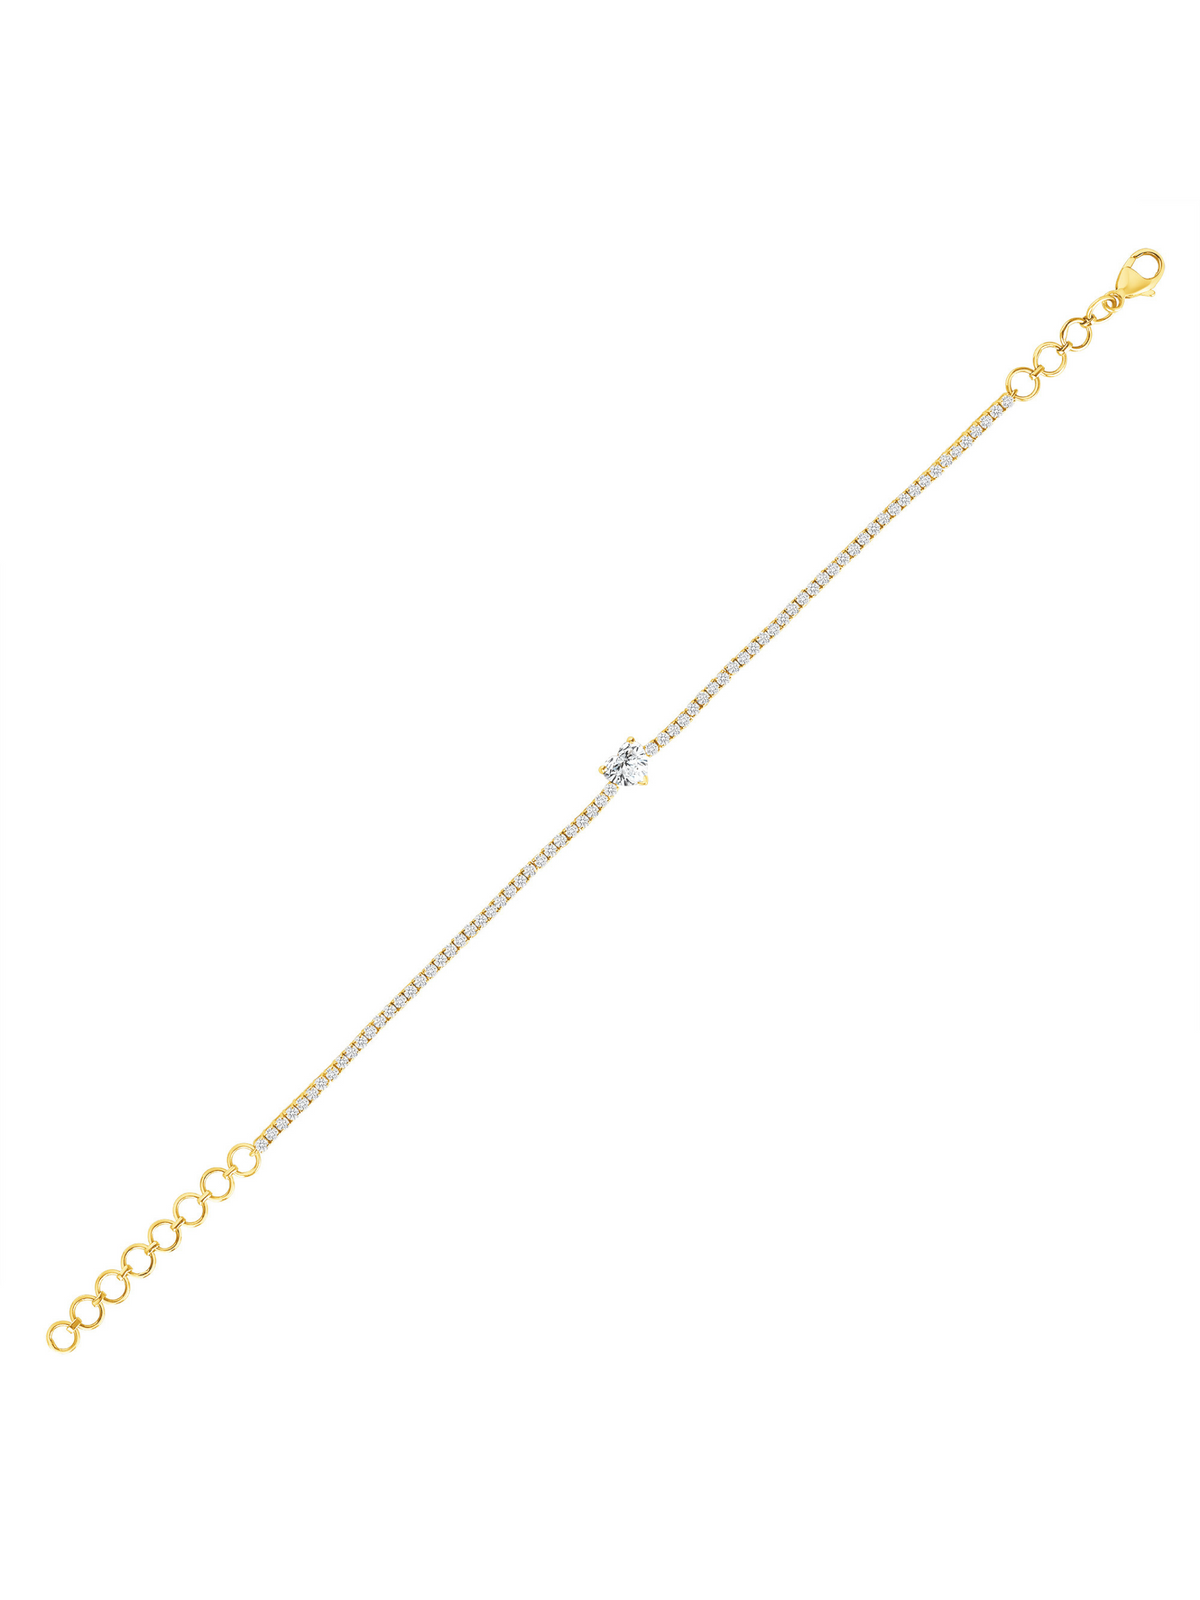 yellow gold tennis bracelet with solitaire heart cut diamond centered 